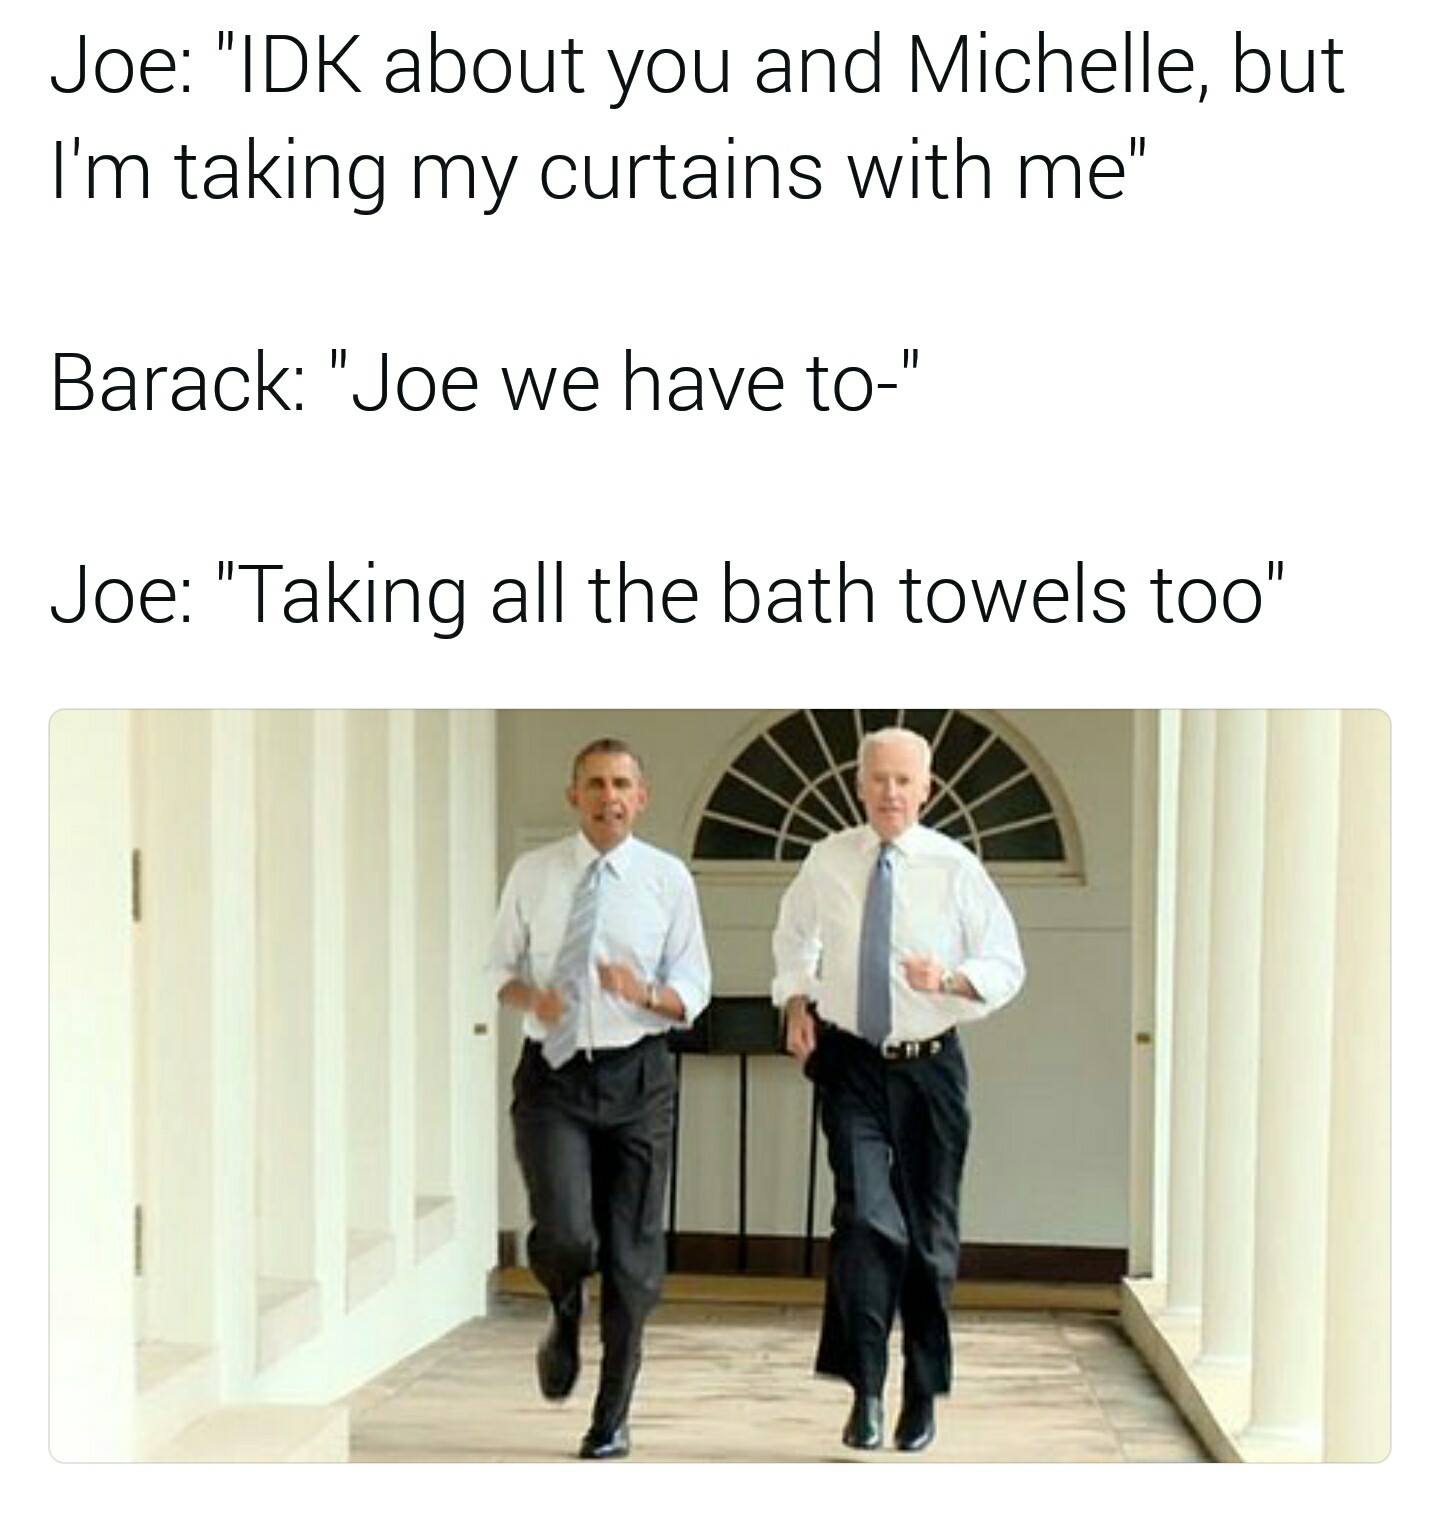 barack obama and joe biden - Joe "Idk about you and Michelle, but I'm taking my curtains with me" Barack "Joe we have to" Joe "Taking all the bath towels too"